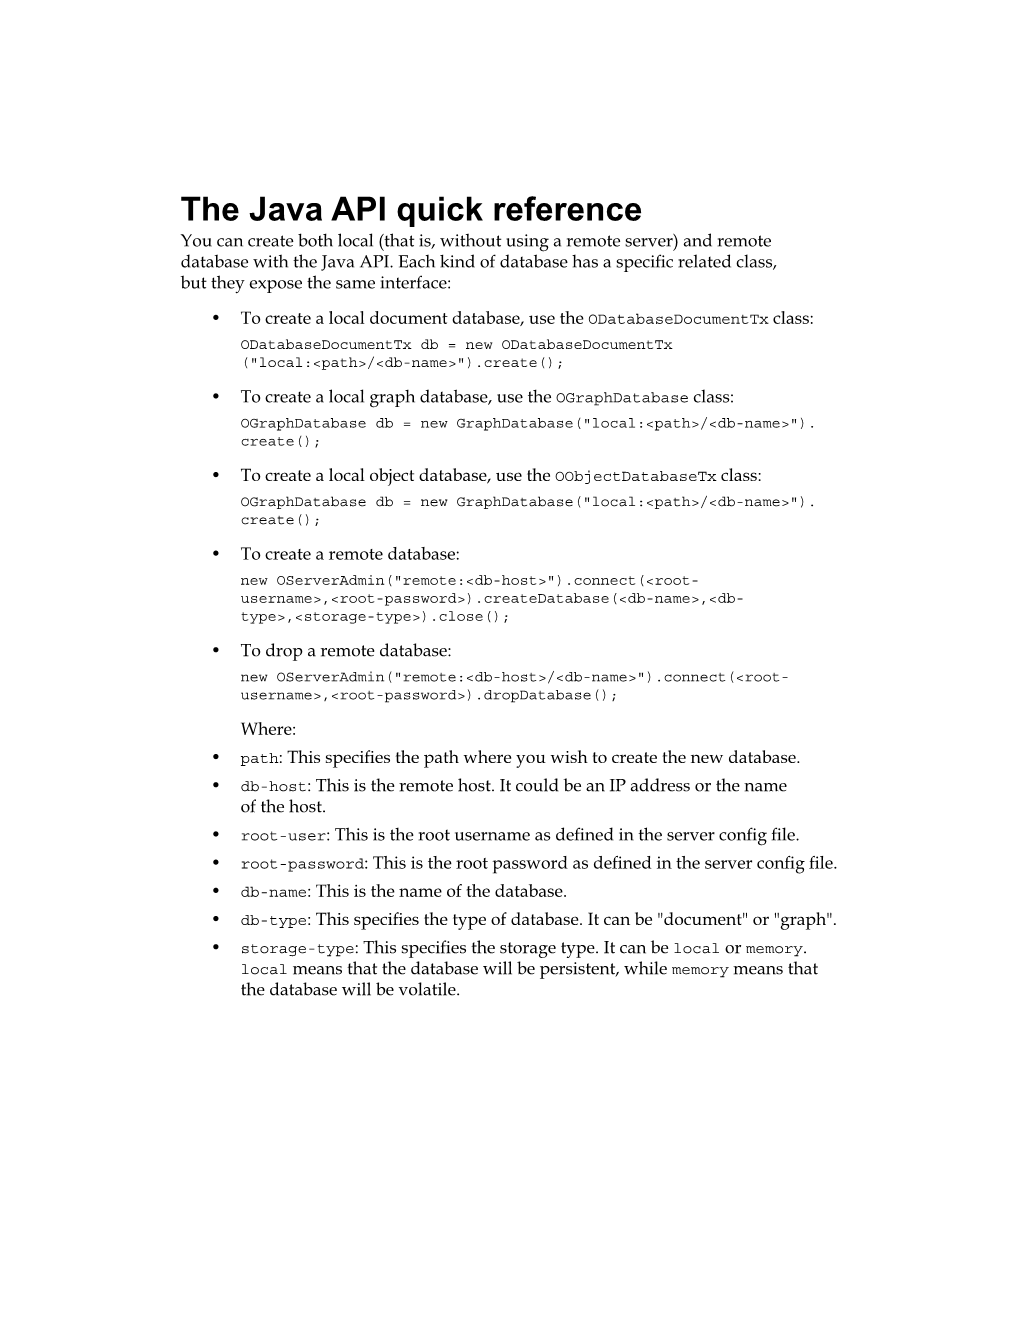 The Java API Quick Reference You Can Create Both Local (That Is, Without Using a Remote Server) and Remote Database with the Java API